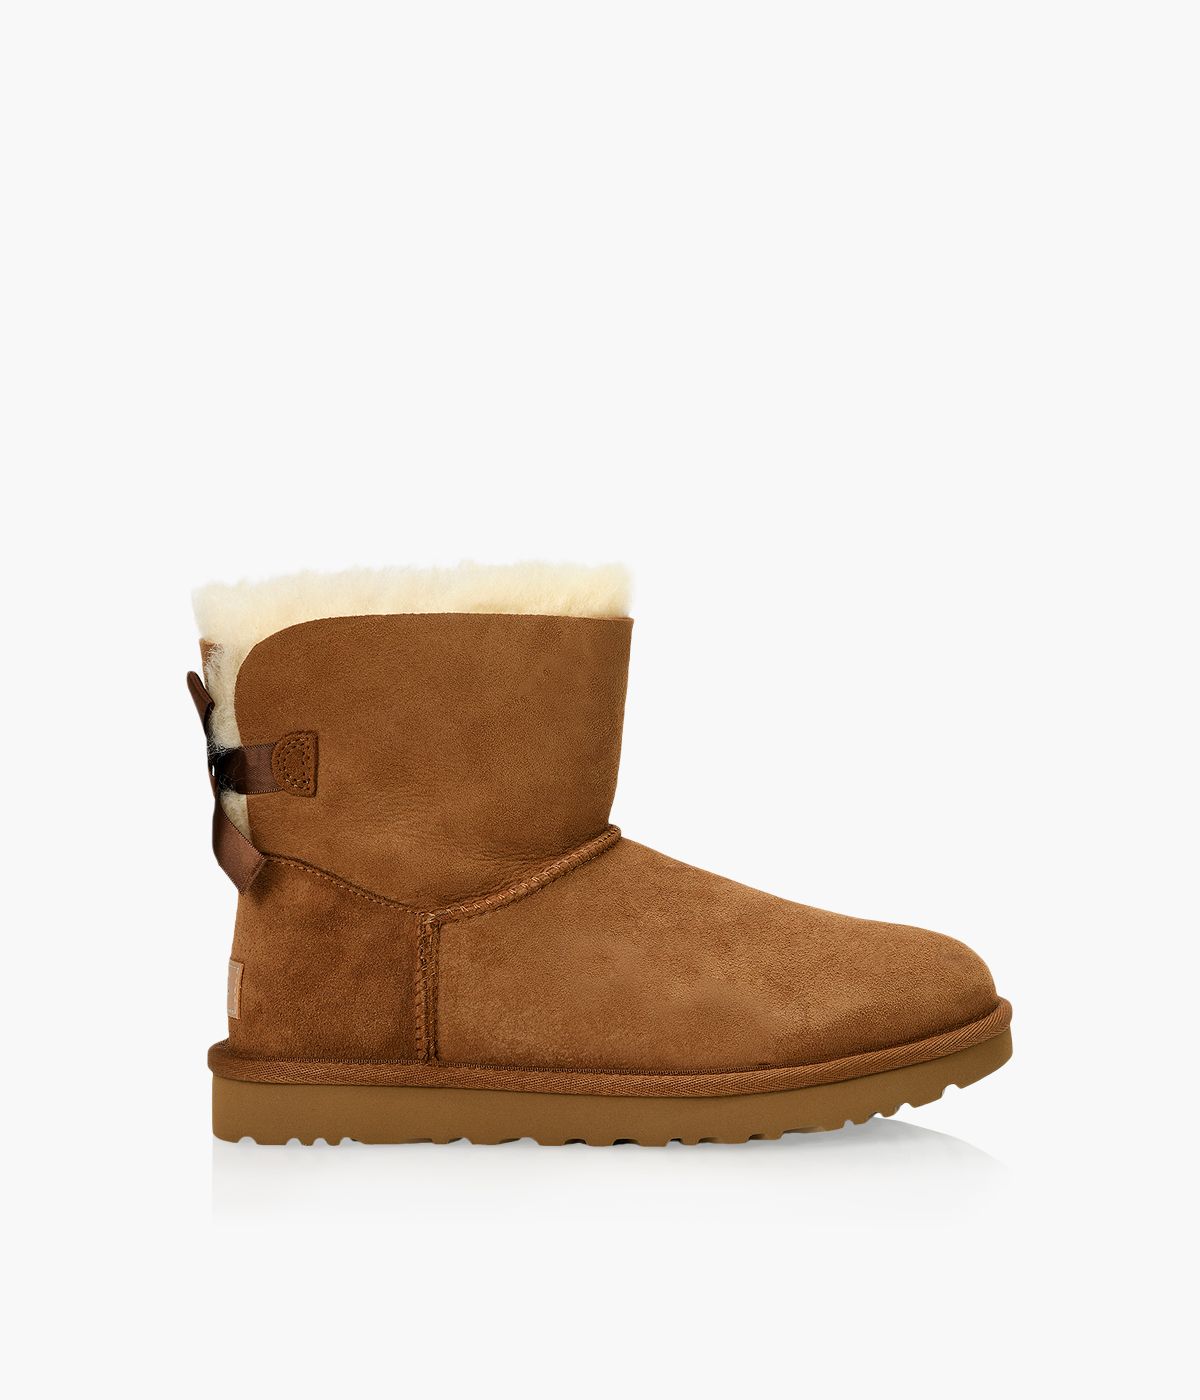 UGG MINI BAILEY BOW II BOOT | Browns Shoes